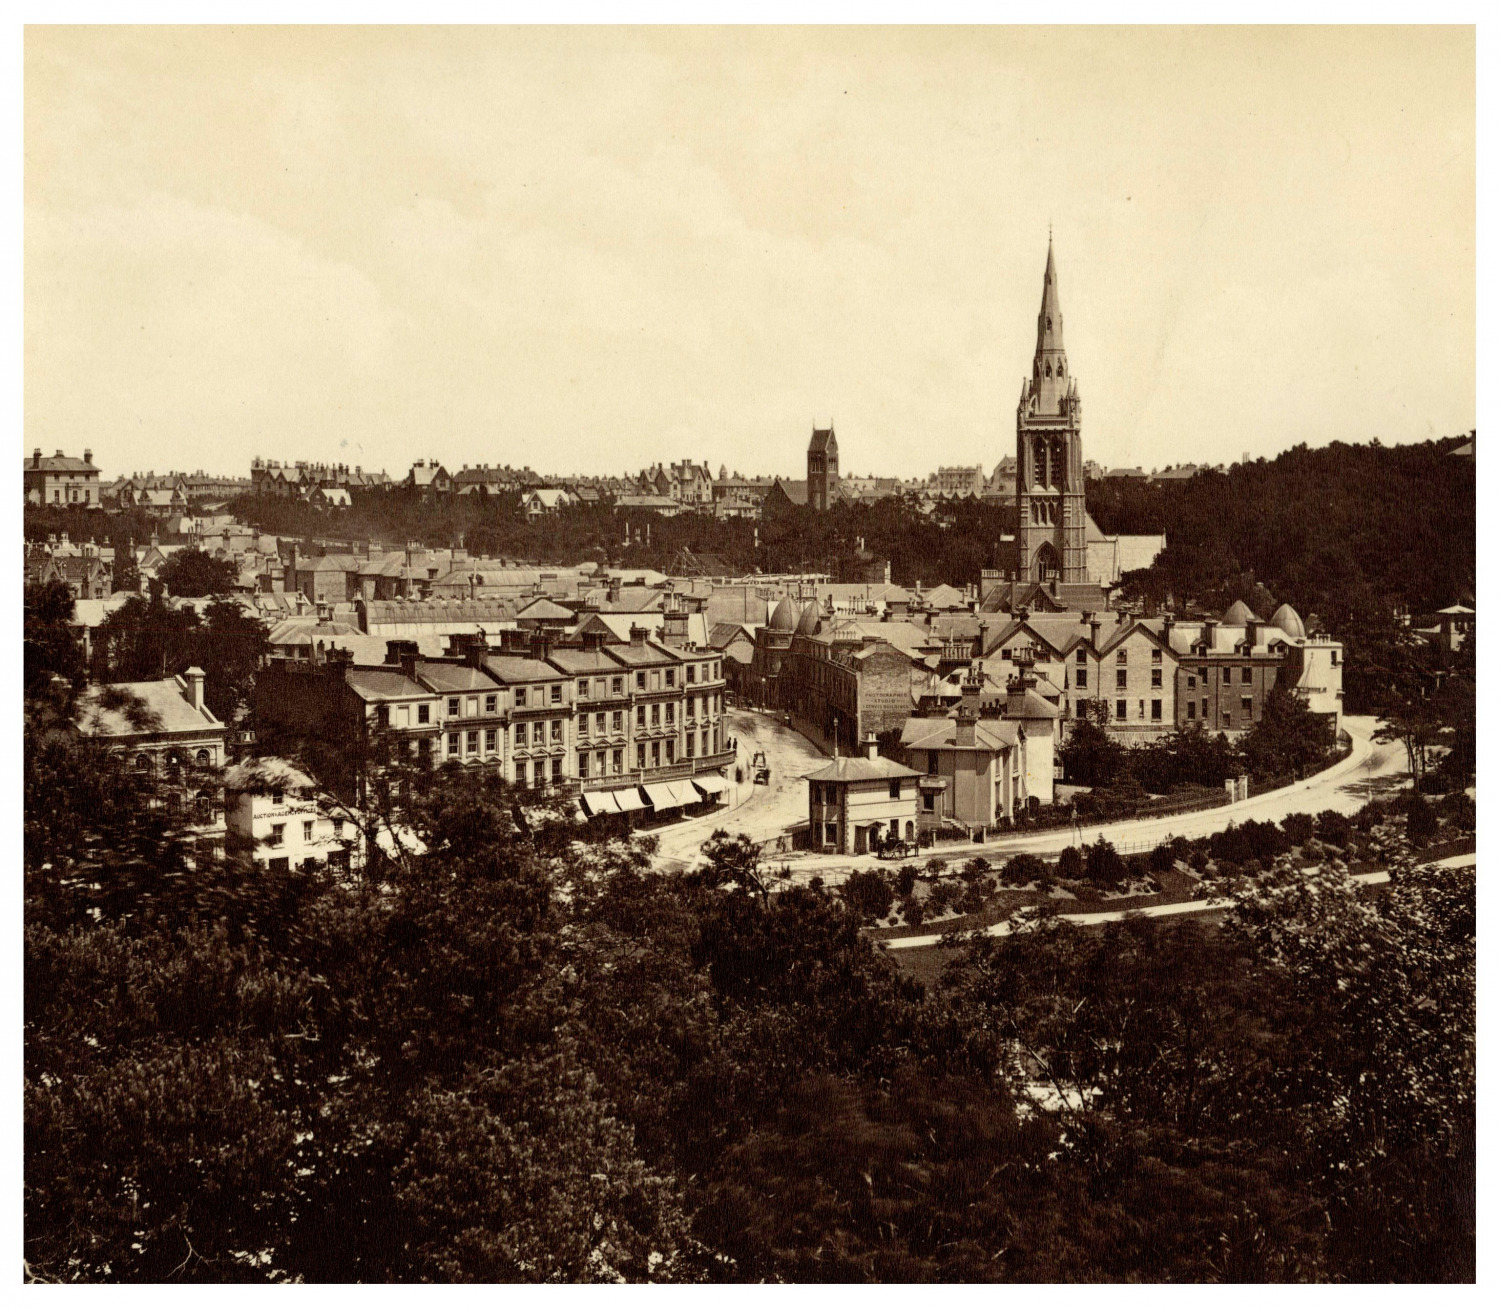 England, Bournemouth, from Terrace Mount, C.N. Vintage print, albumin print print